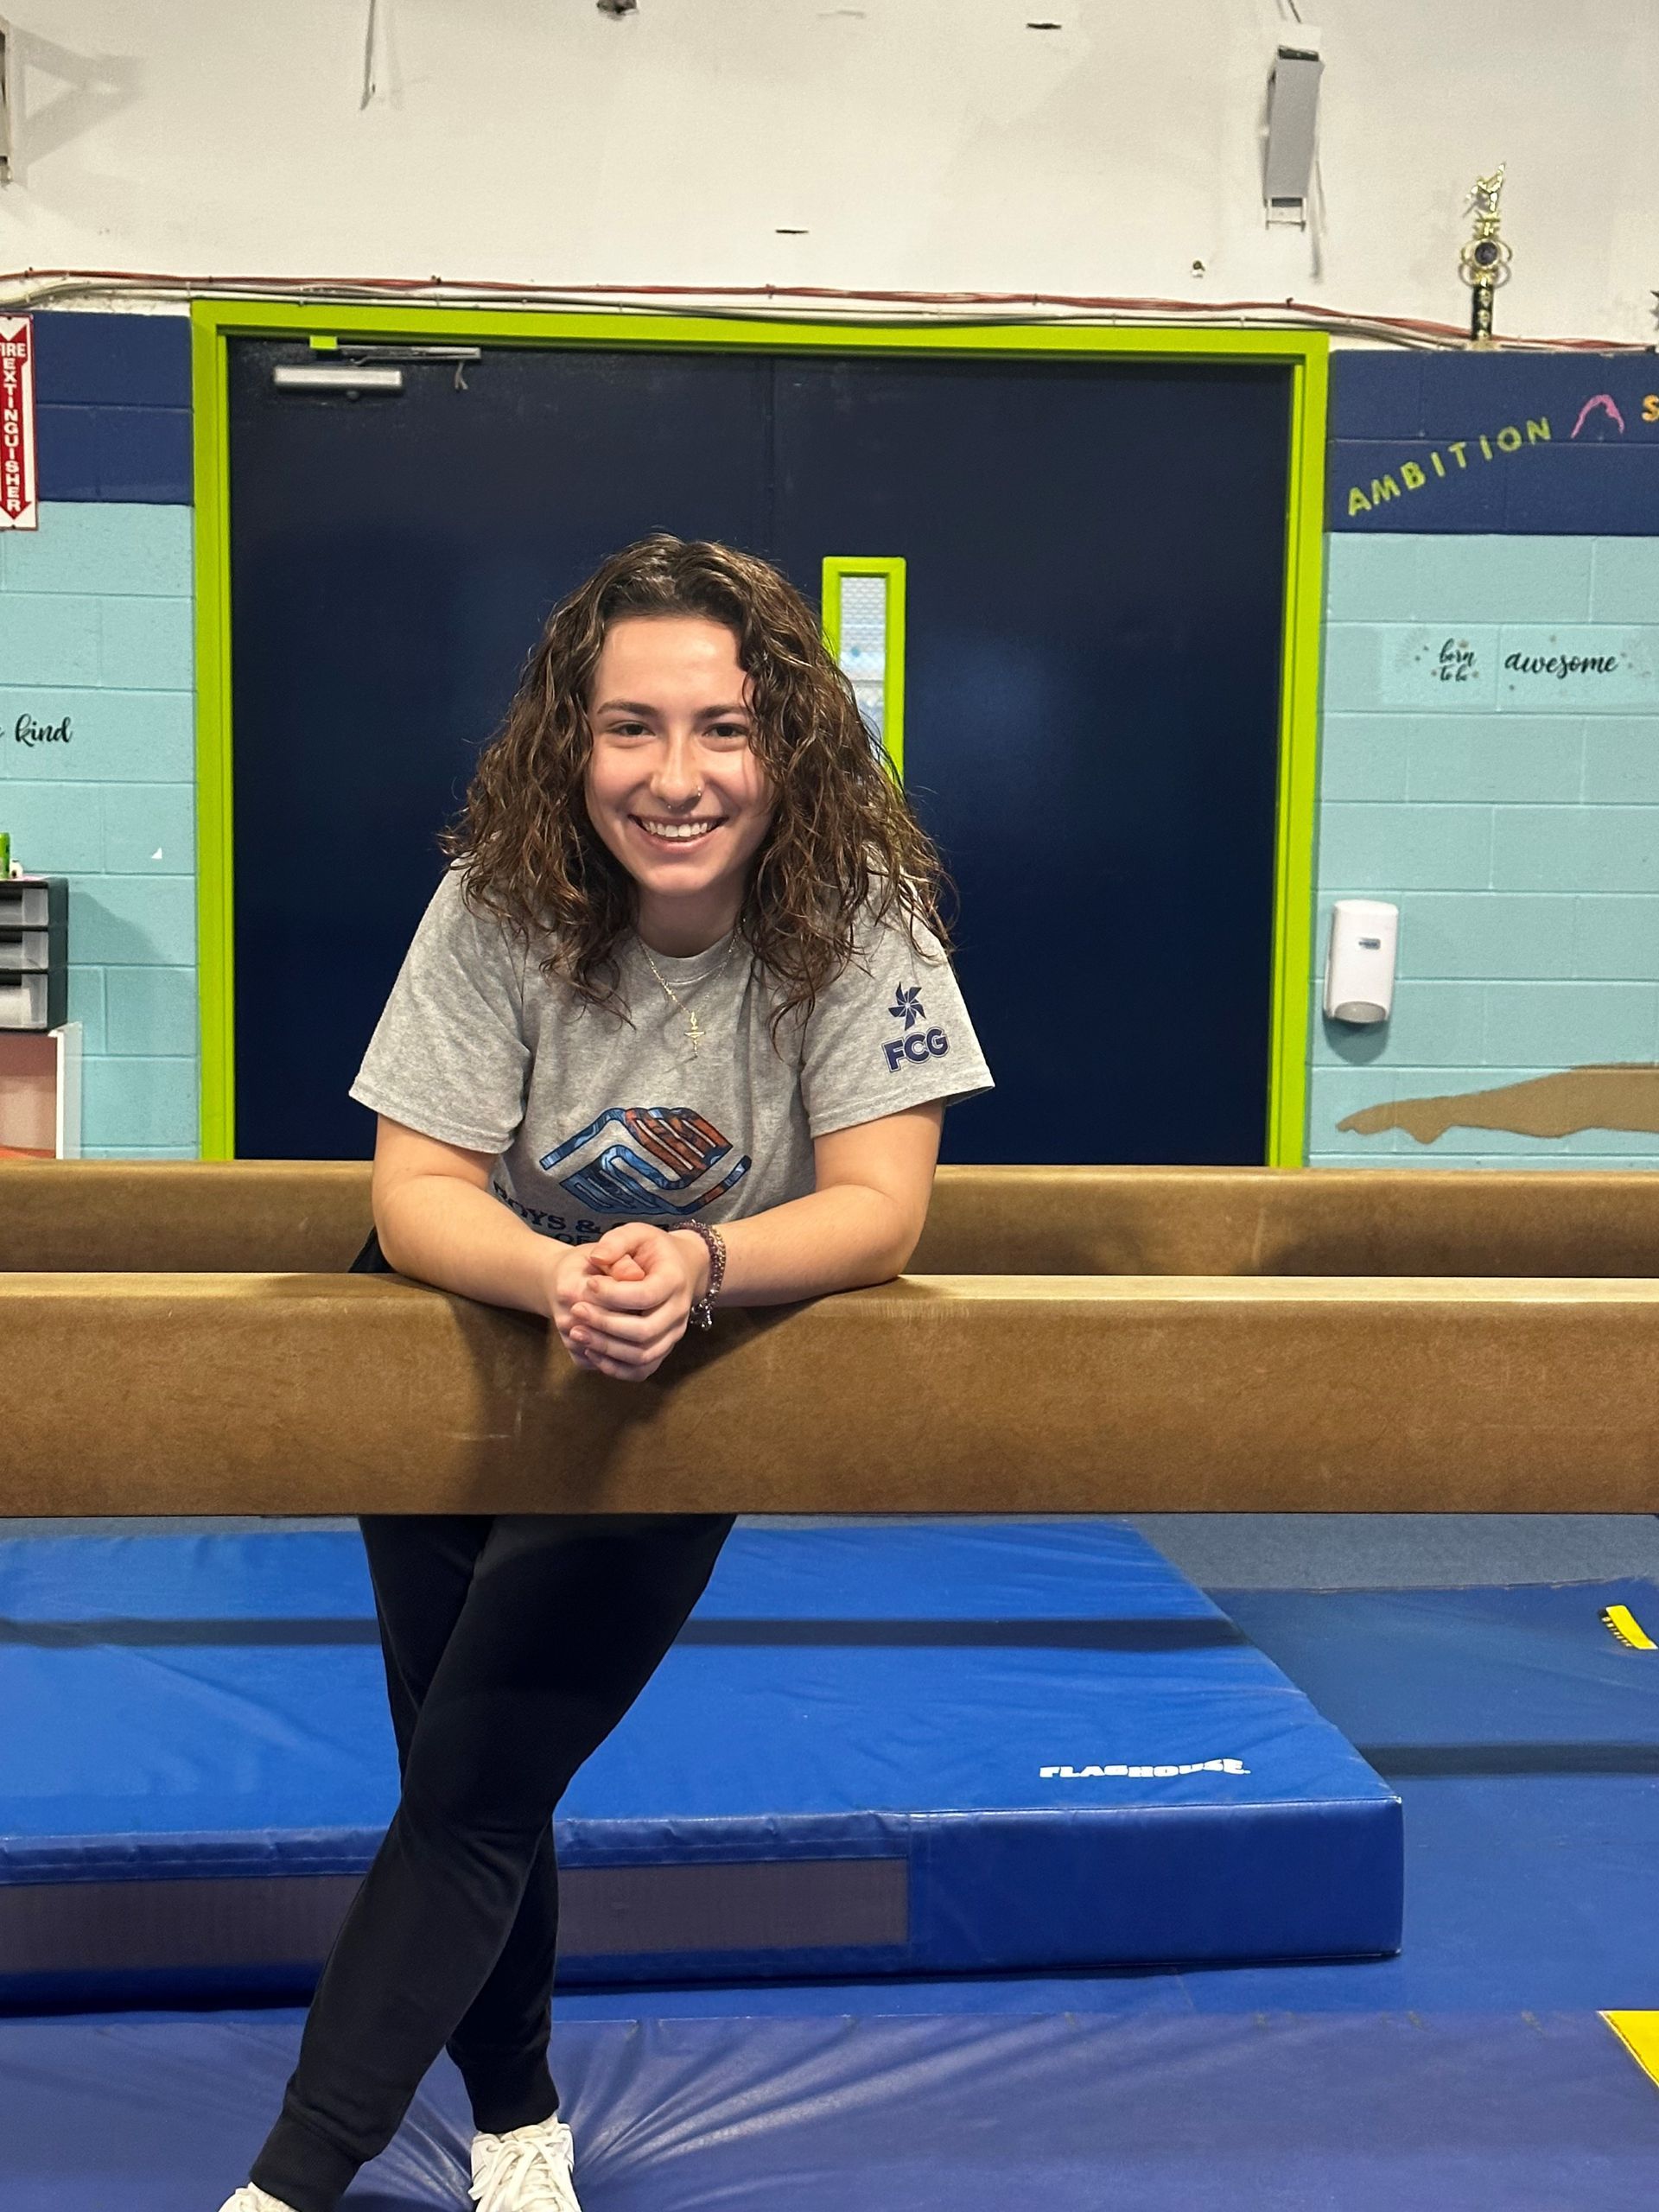 Hey! My name is Jules, I have been coaching for 3 1/2 years now. I was also a gymnast for 13 years and reached platinum. I am attending CCSU for Media Studies and Art and I love to play guitar, surf, and ski! 